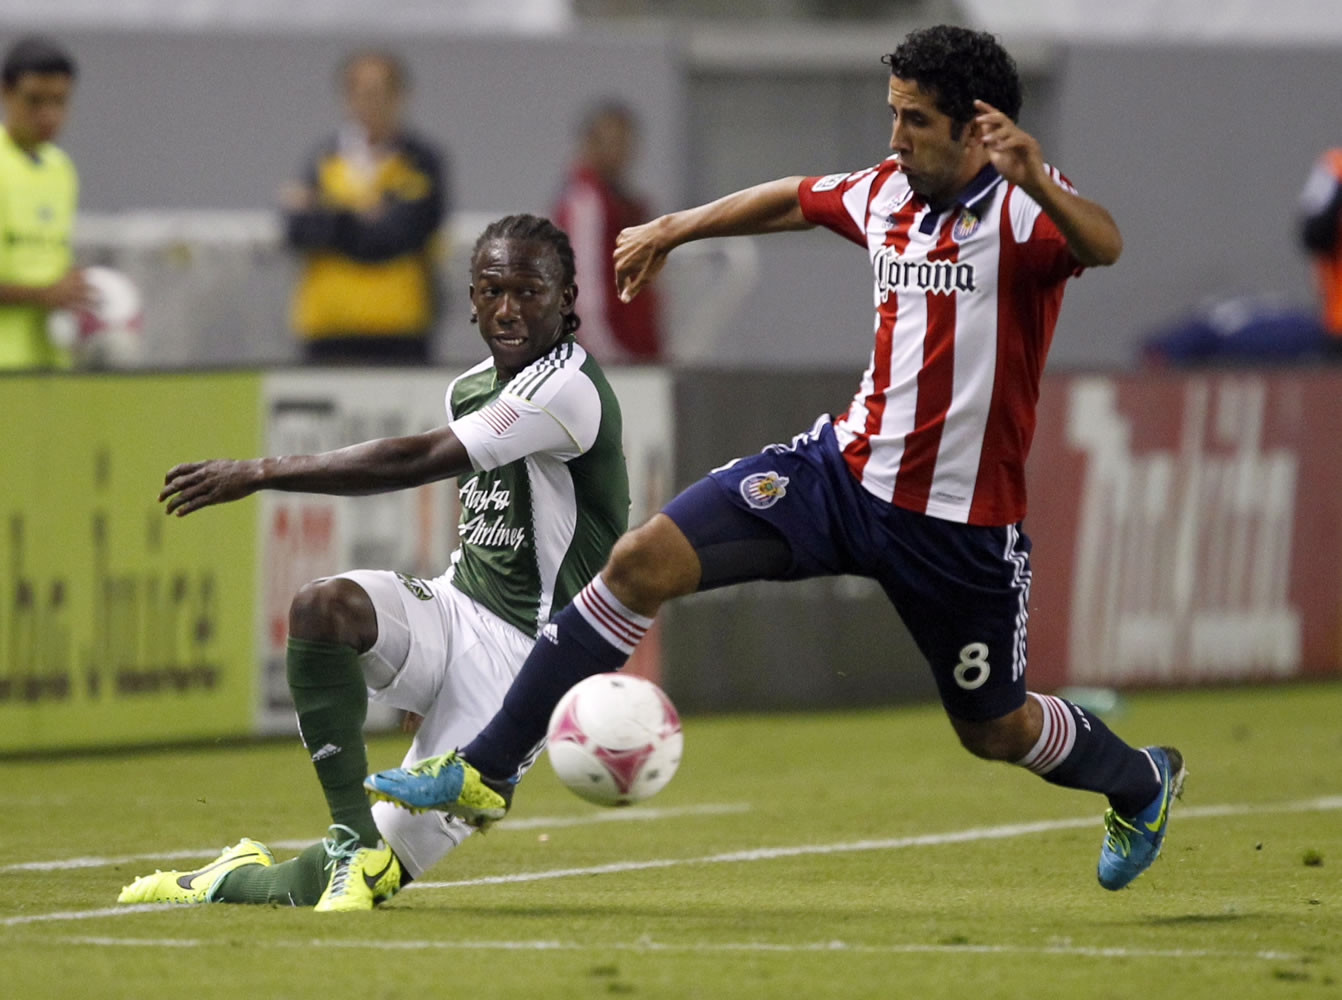 Portland Timbers midfielder Darlington Nagbe, left, gets a pass by Chivas USA midfielder Oswaldo Minda (8) during the first half Saturday. The Timbers won the match 5-0.